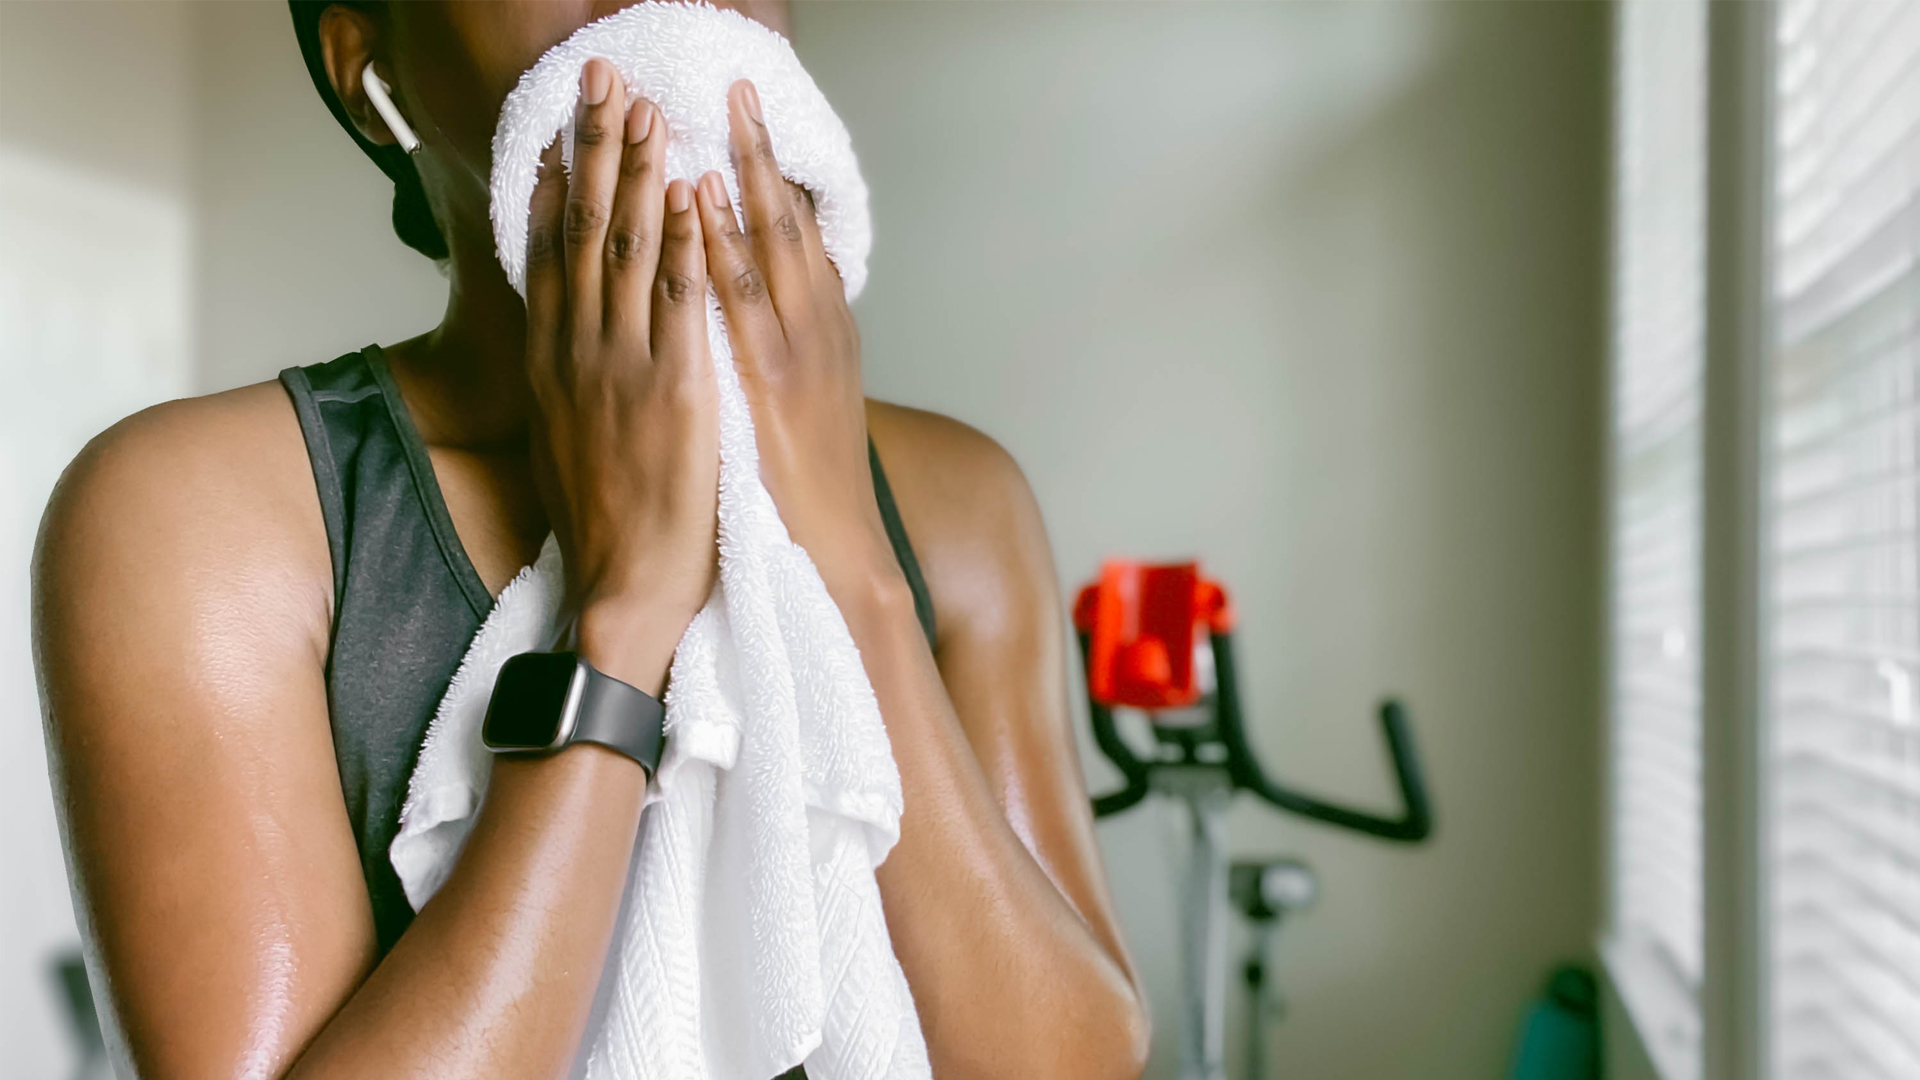 Image of woman after workout on exercise bike